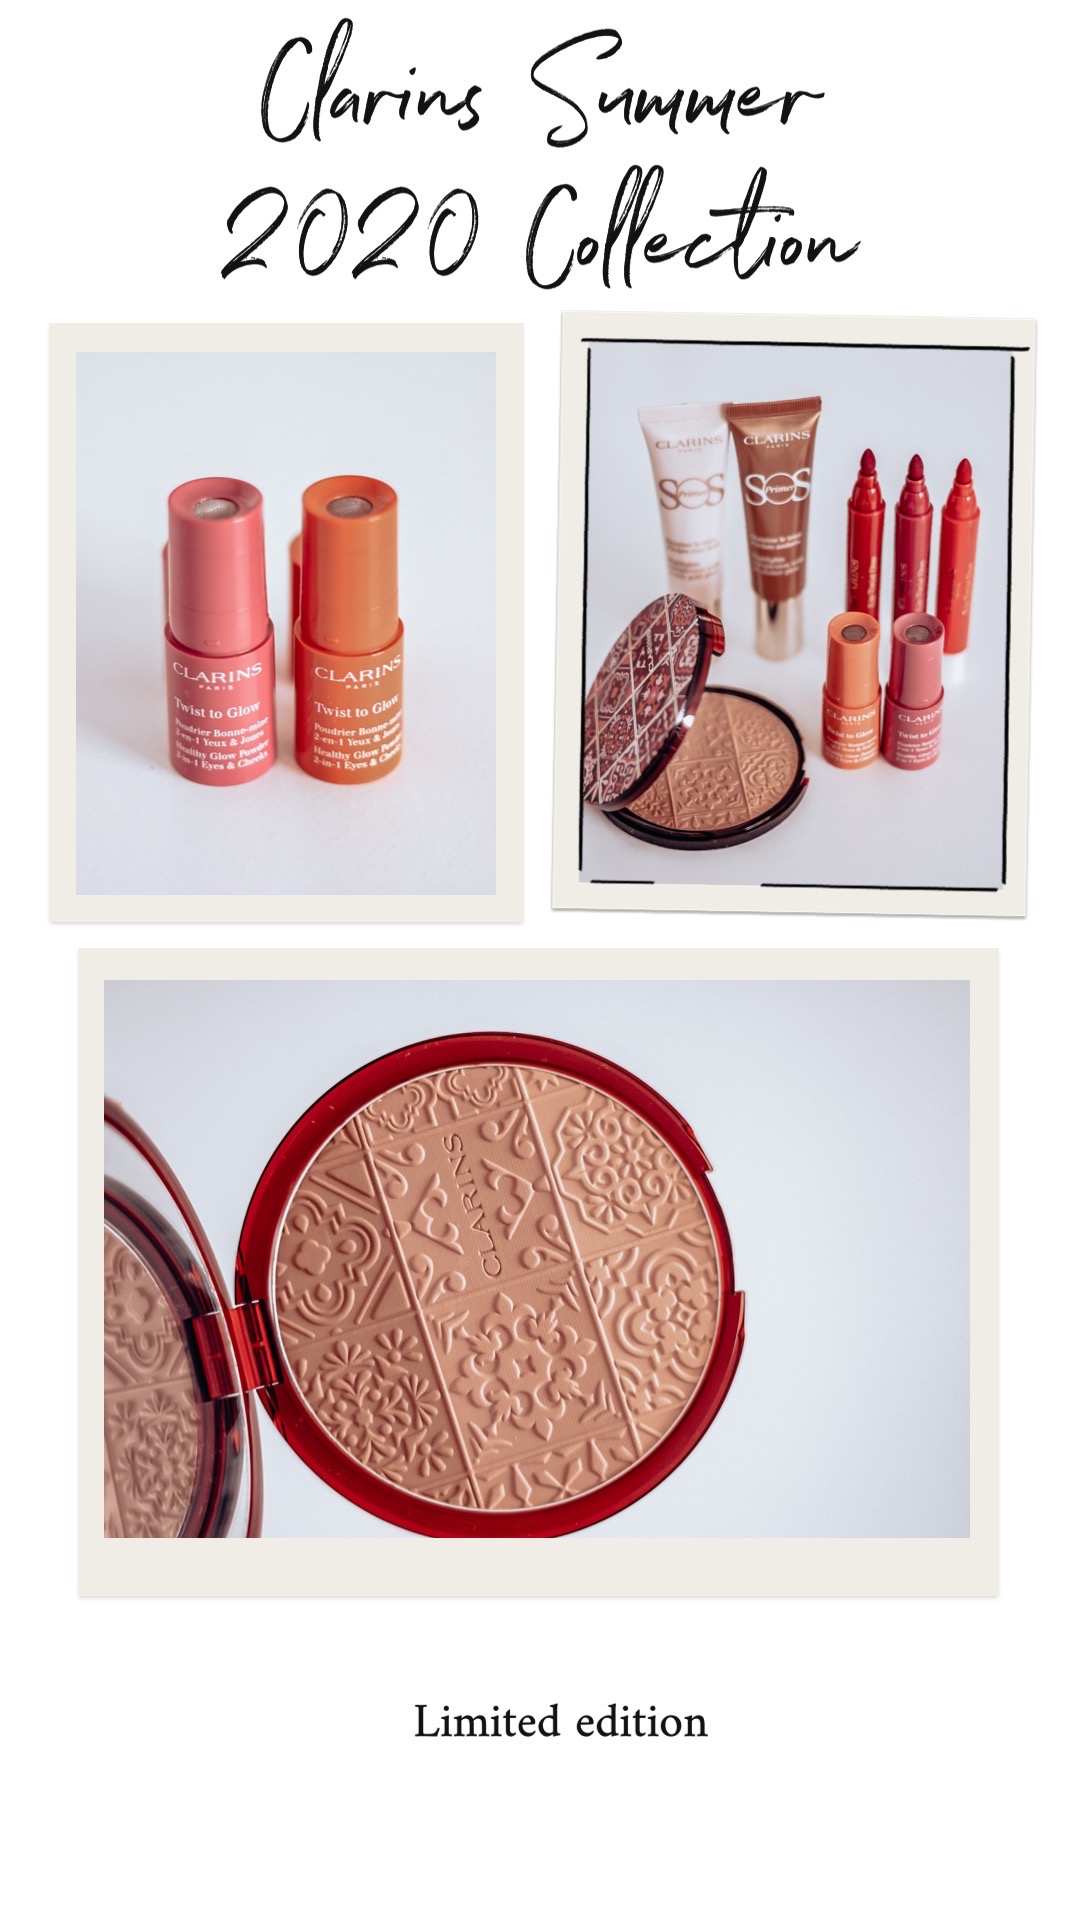 Clarins Summer 2020 Collection